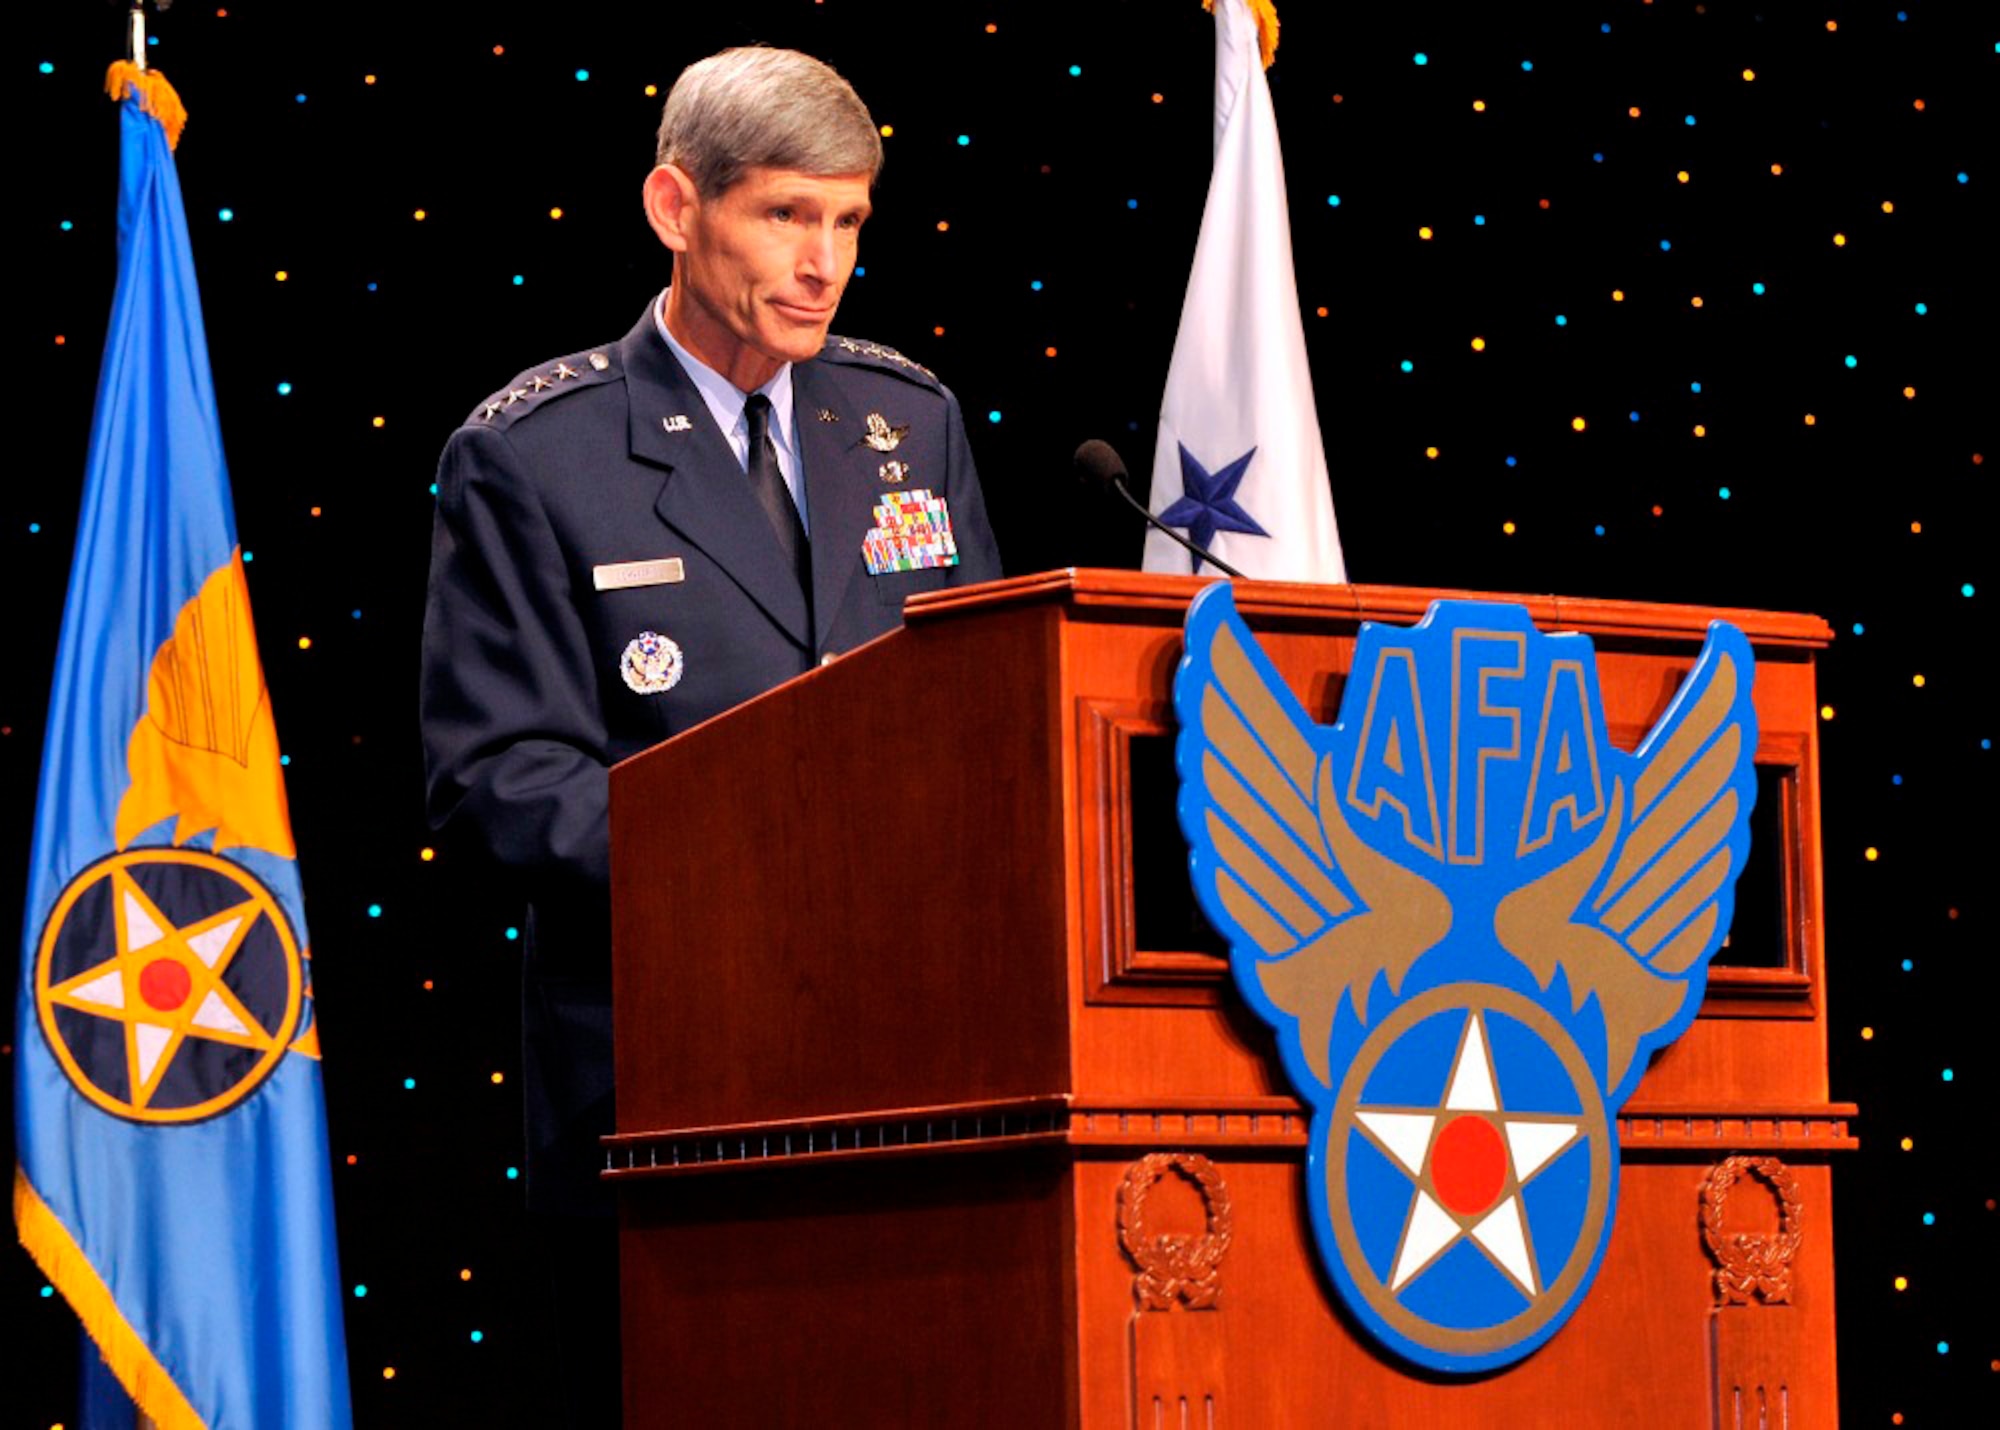 Air Force Chief of Staff Gen. Norton A. Schwartz speaks to attendees at the 24th annual Air Force Association Air & Space Conference and Technology Exposition Sept. 15 in Washington. (U.S. Air Force photo)